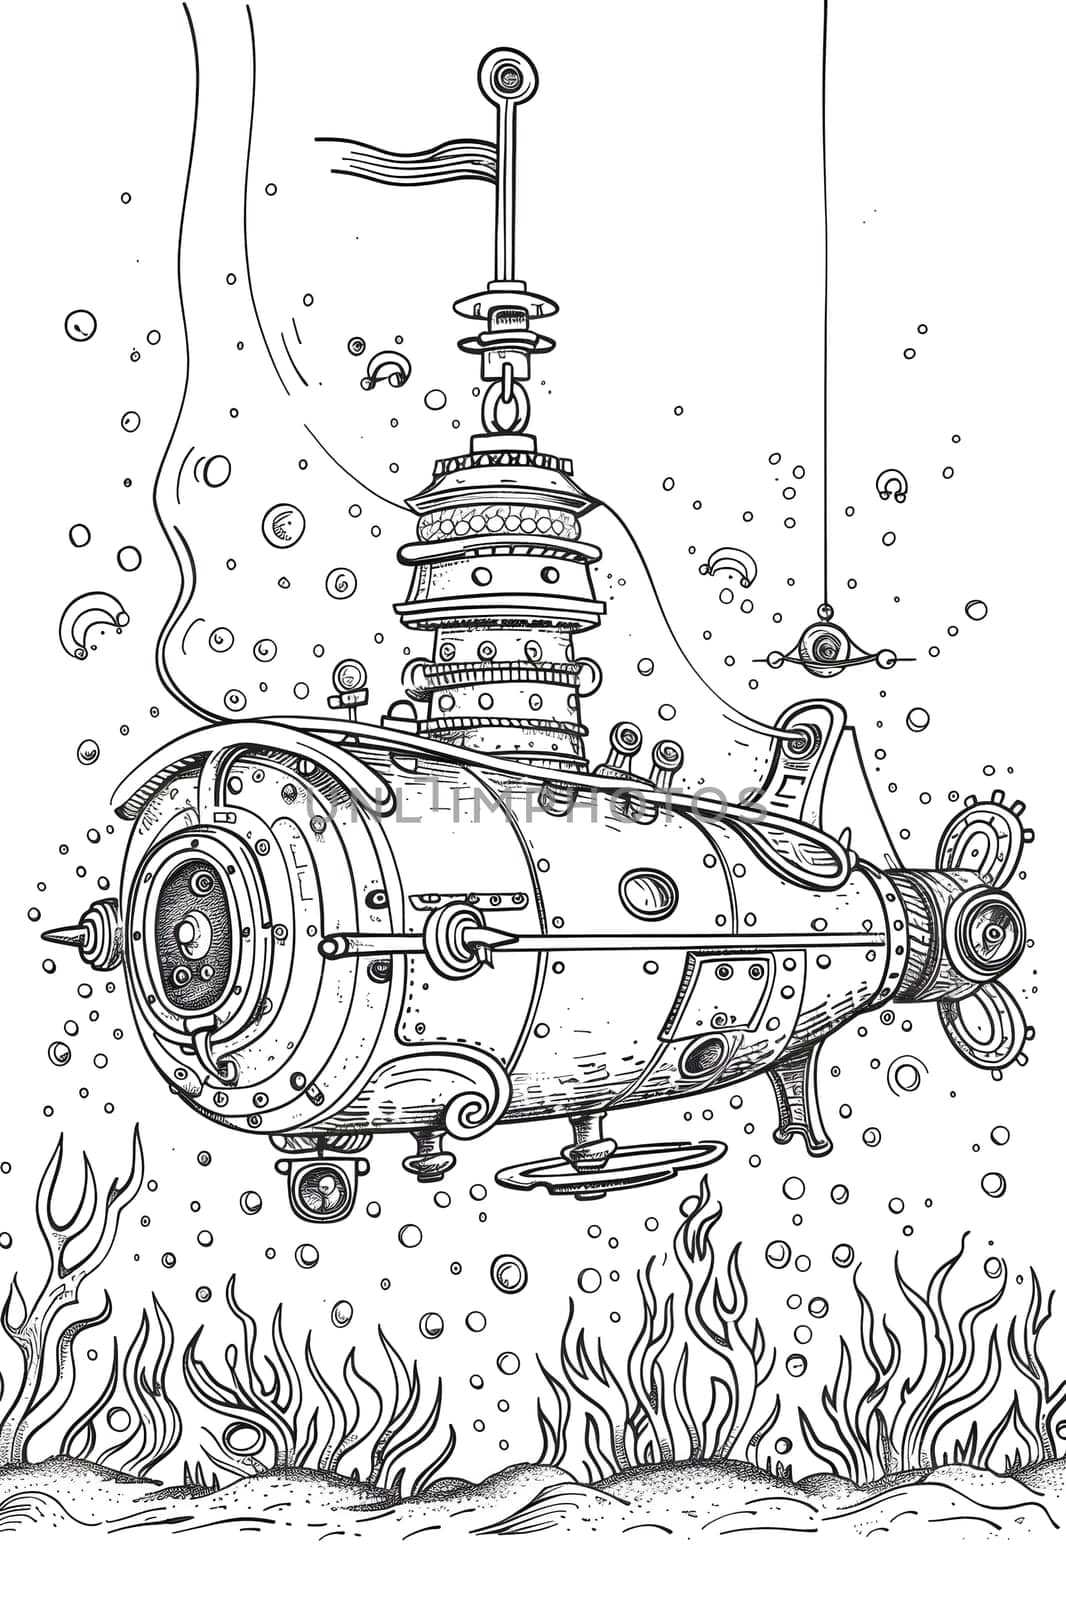 A monochrome illustration of a submarine in the ocean, done in a black and white sketch style. The art captures a sense of depth and mystery